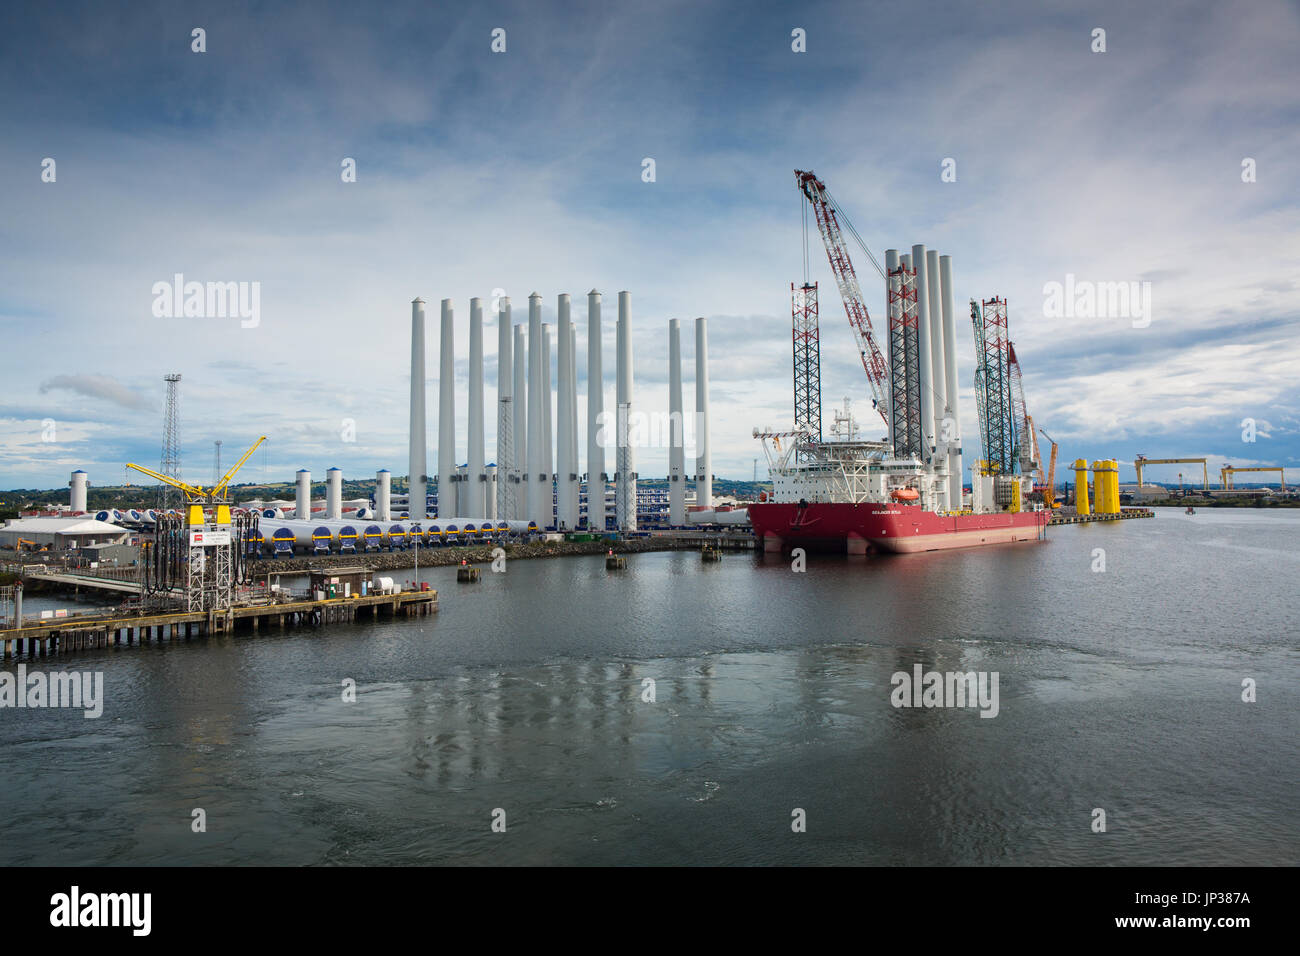 Floating wind farm parts at Belfast dock awaiting shipping and assembly. Stock Photo